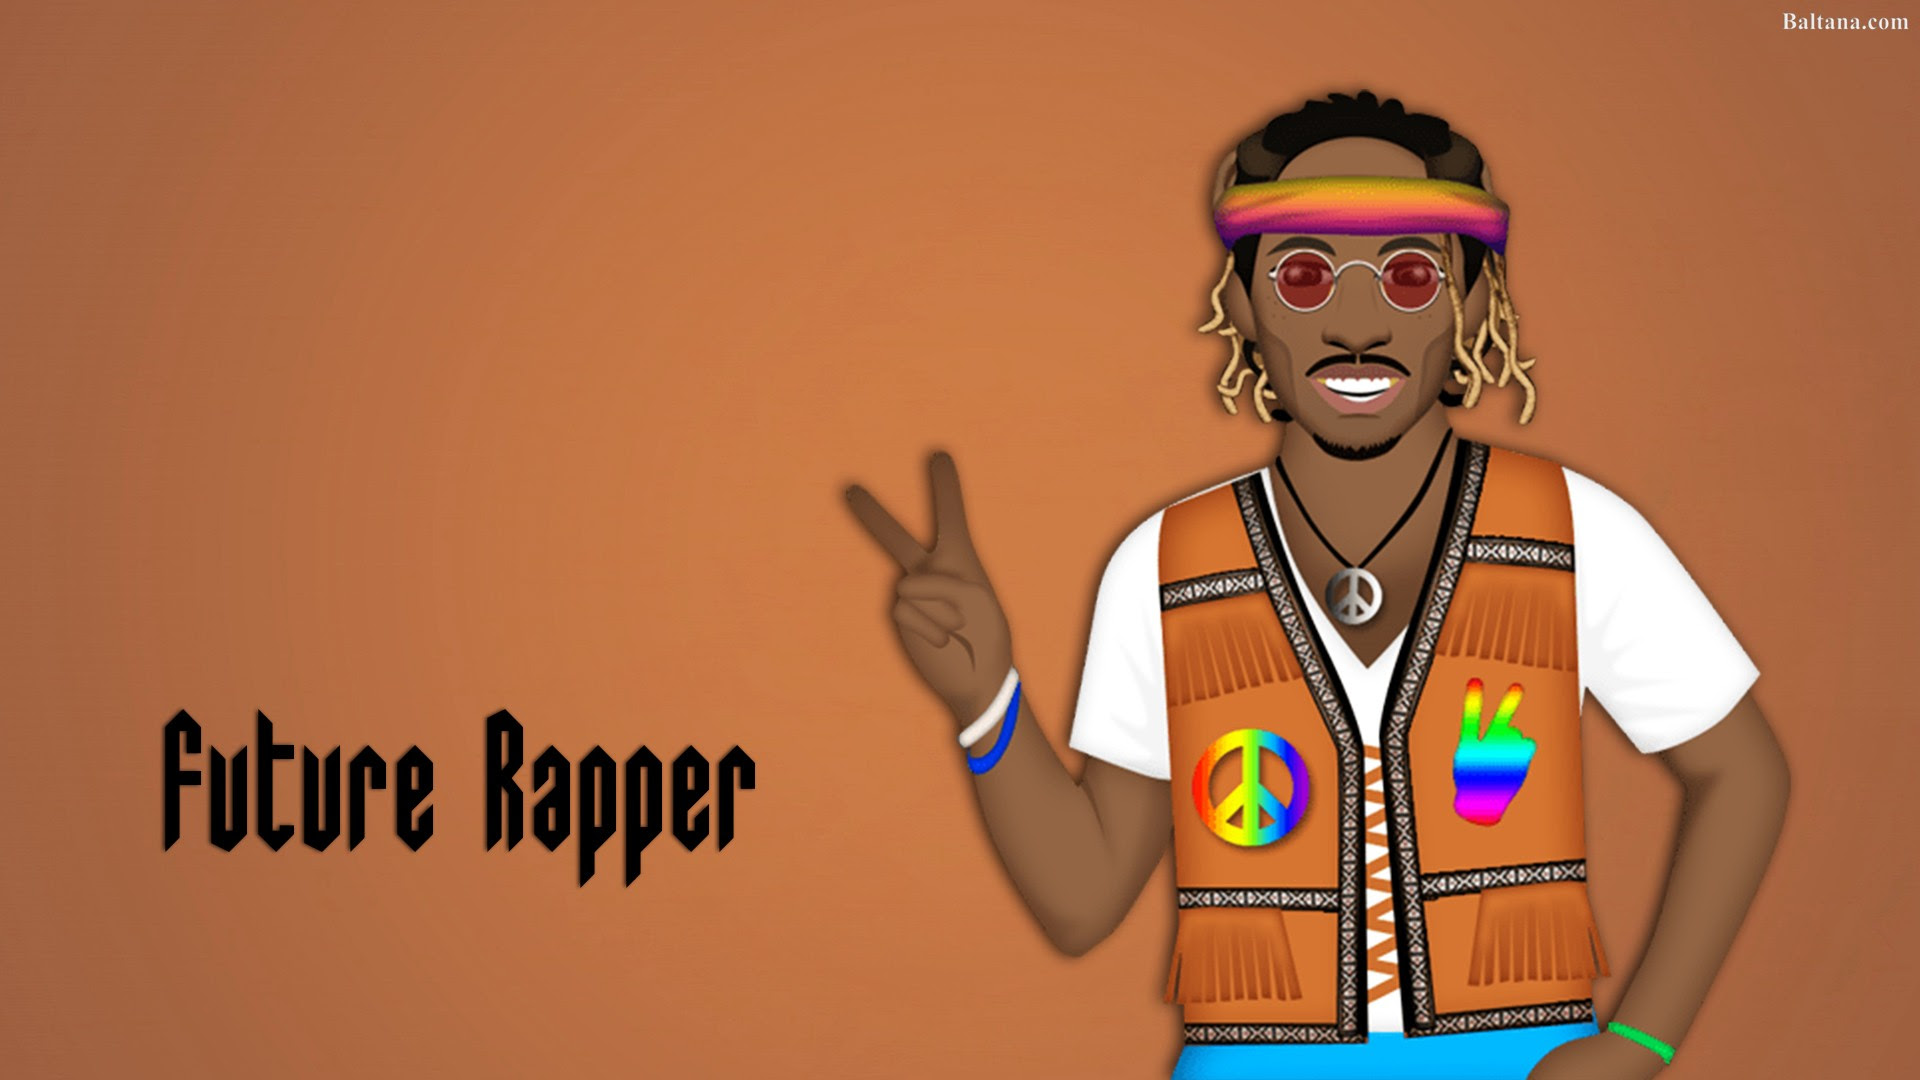 Cool Wallpapers Of Rappers